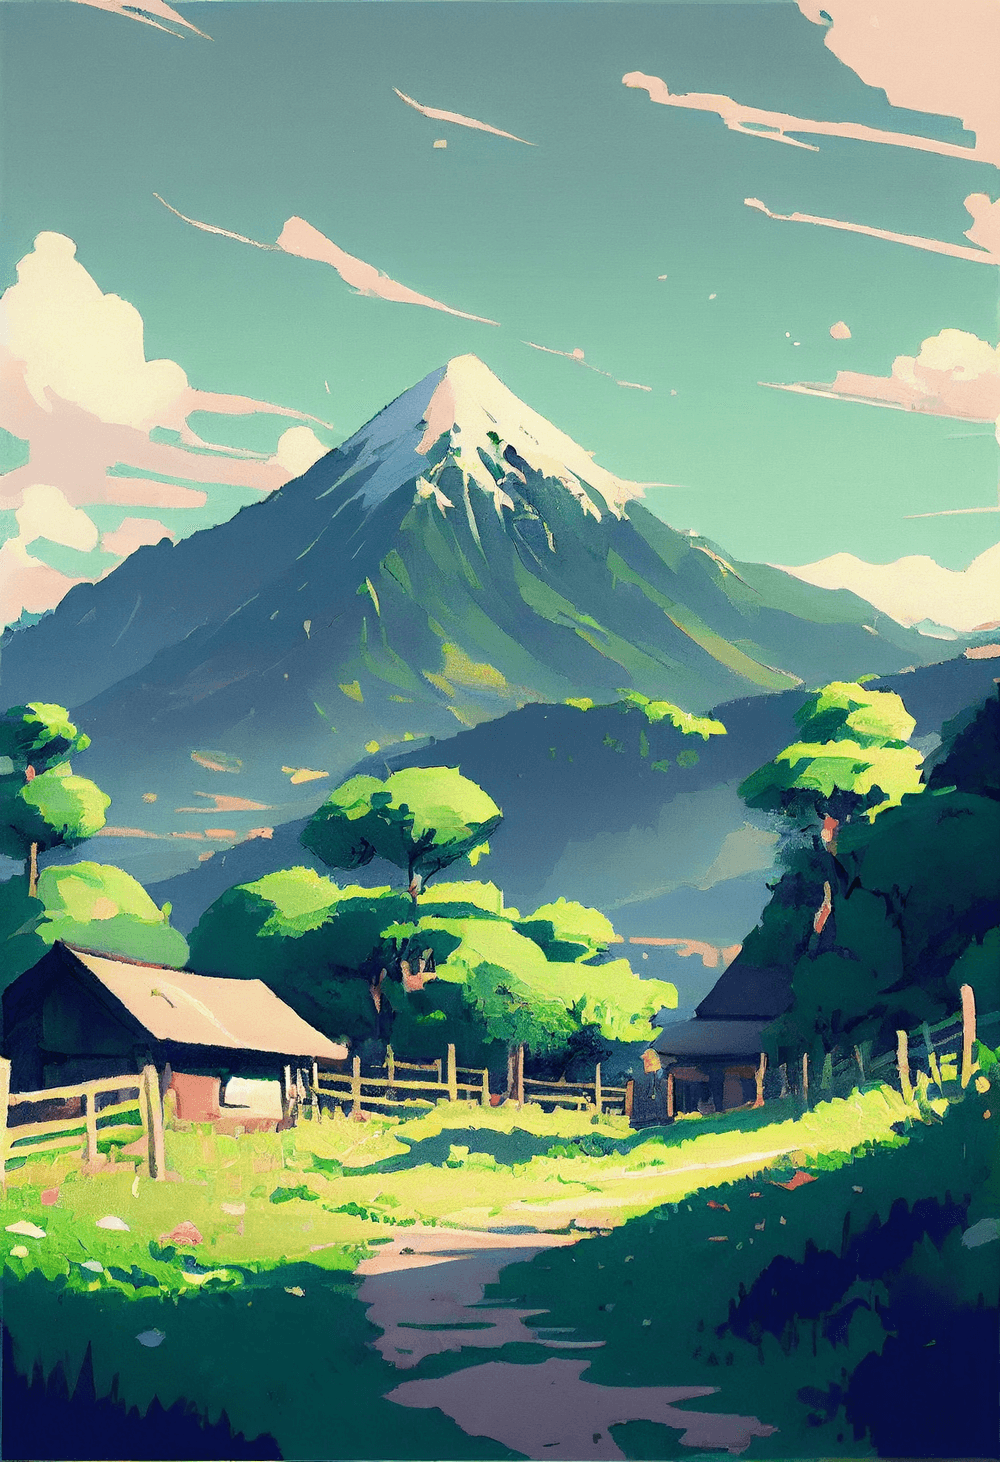 Ancient Landscapes by Fukei #13